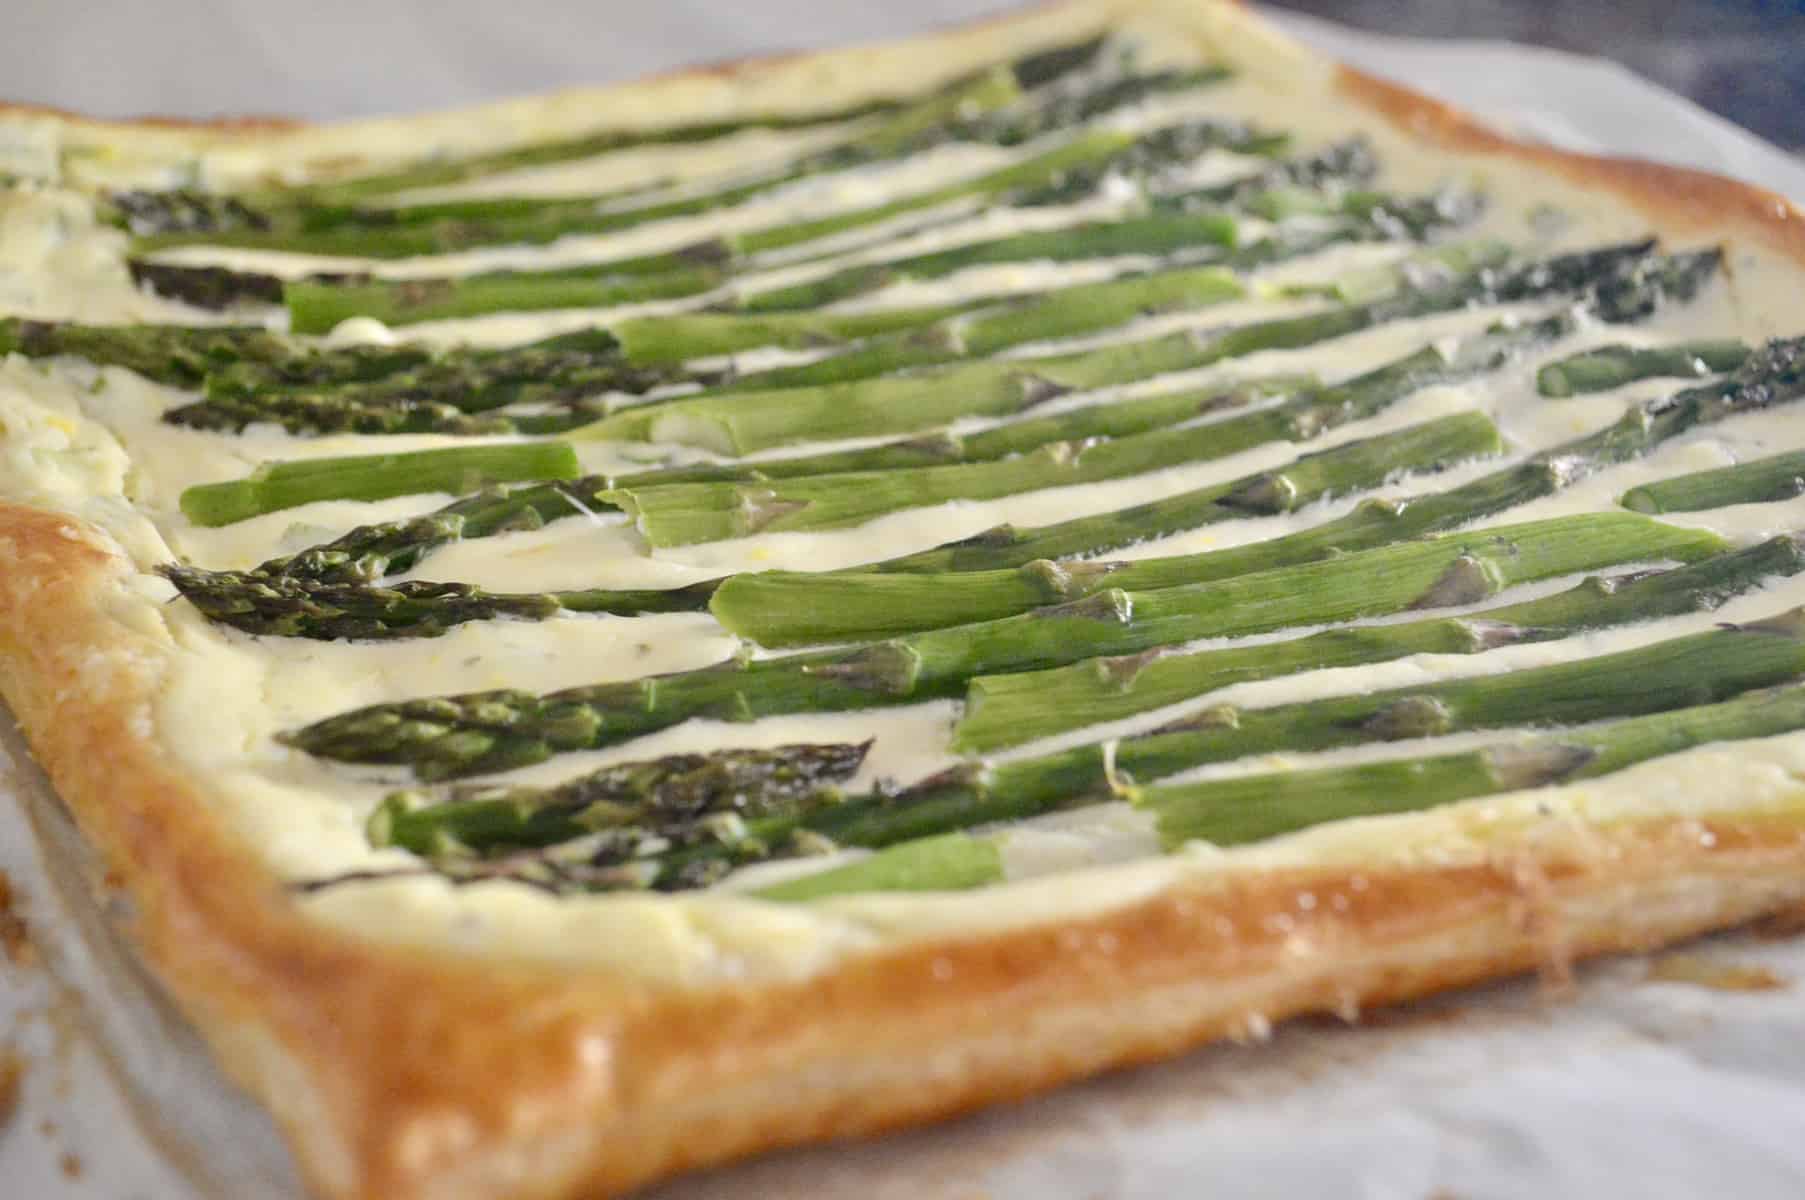 Asparagus Tart with Ricotta and Lemon is made with puff pastry and is an easy recipe for an appetizer or side dish. Best Brunch Recipes. Great party food for baby or bridal showers, or served on the holidays. #asparagus #tart #ricotta #puffpastry #thanksgivingsidedish #christmassidedish #easter #appetizer #partyfood #appetizerforparty #easyrecipe #brunch #breakfast